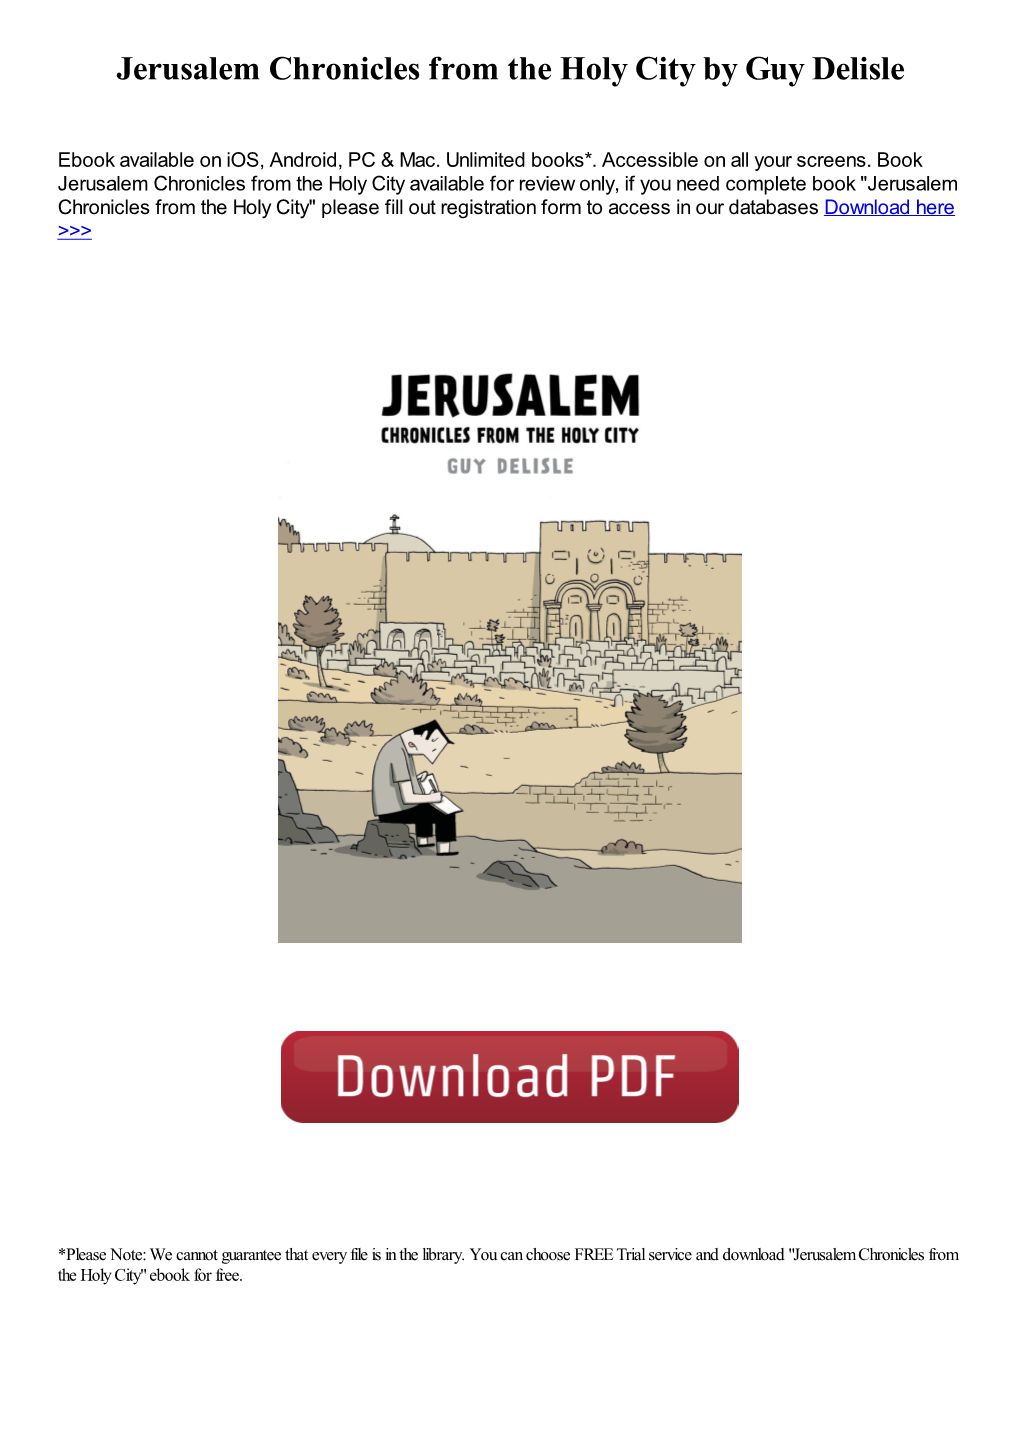 Jerusalem Chronicles from the Holy City by Guy Delisle